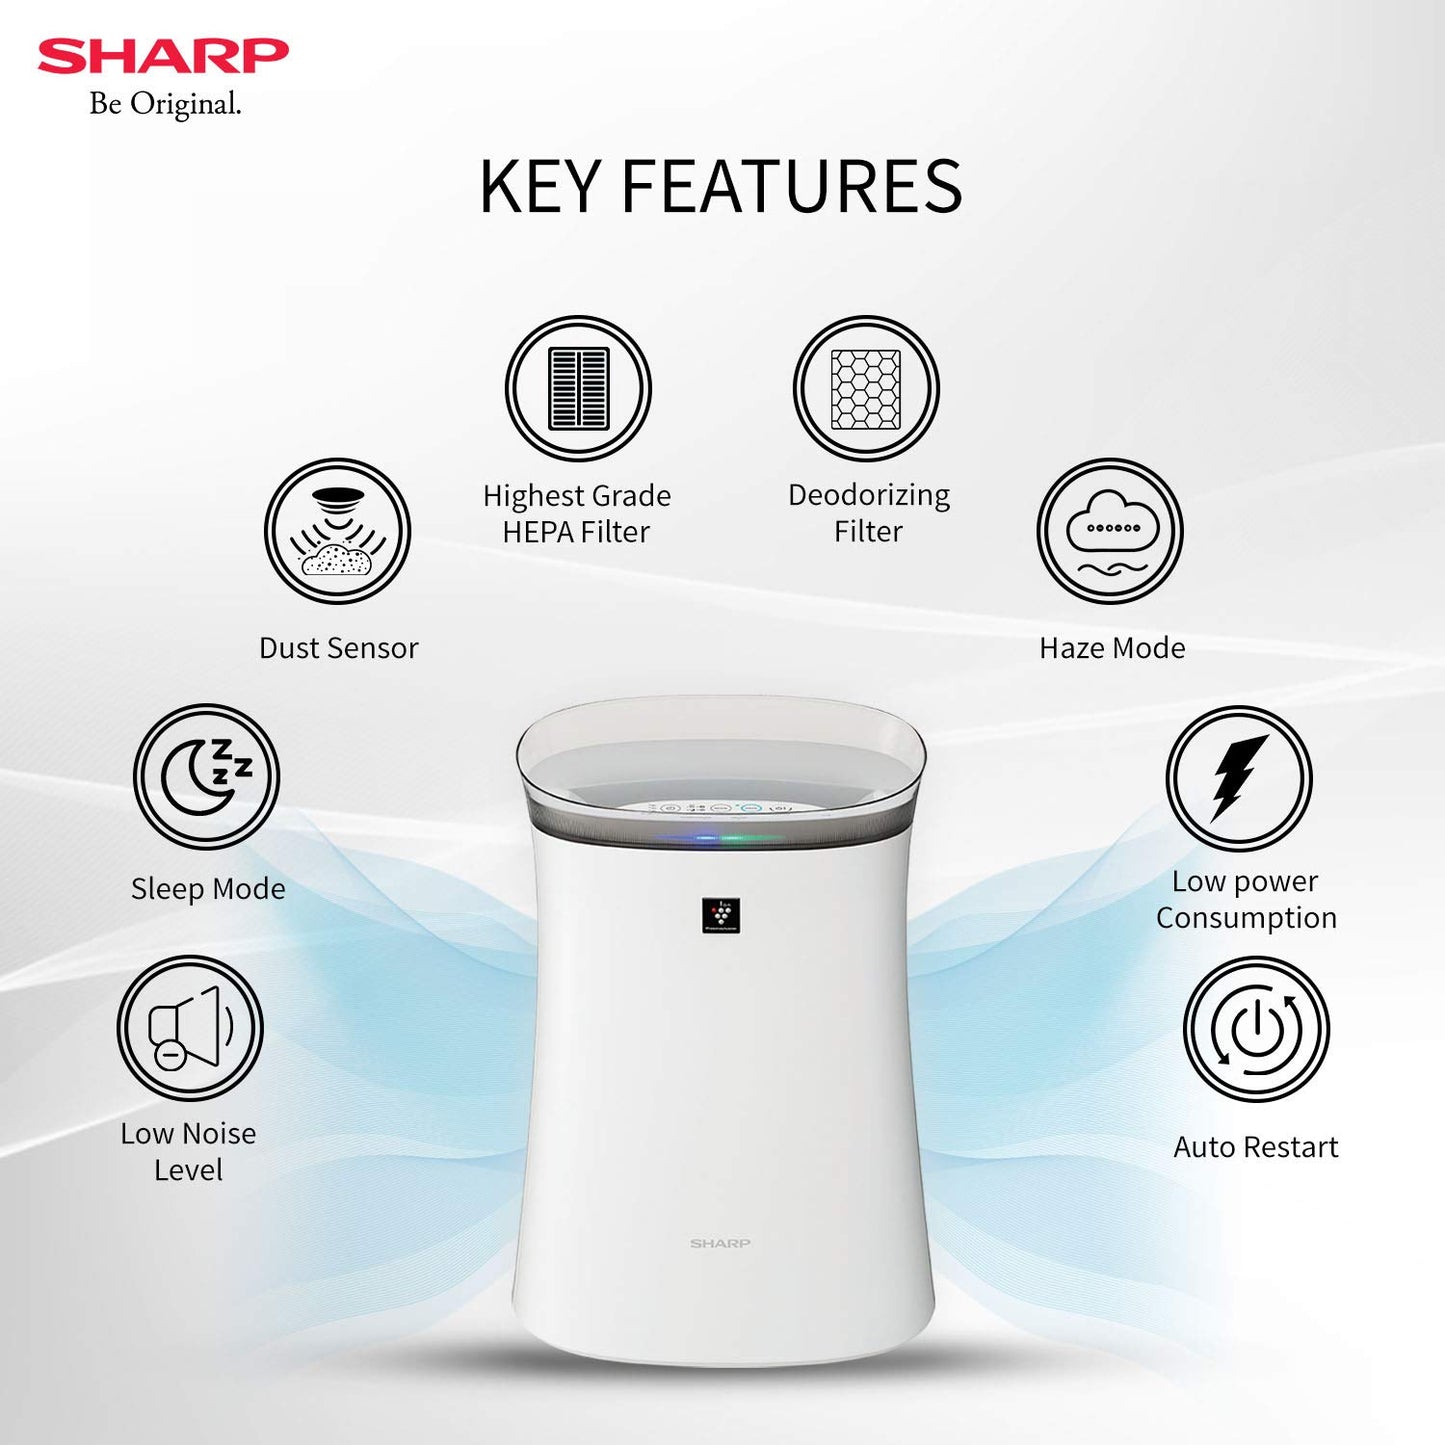 Sharp Air Purifier for Homes & Offices | Dual Purification - ACTIVE (Plasmacluster Technology) & PASSIVE FILTERS (True HEPA H14+Carbon+Pre-Filter) | Captures 99.97% of Impurities | Model:FP-F40E-W | White